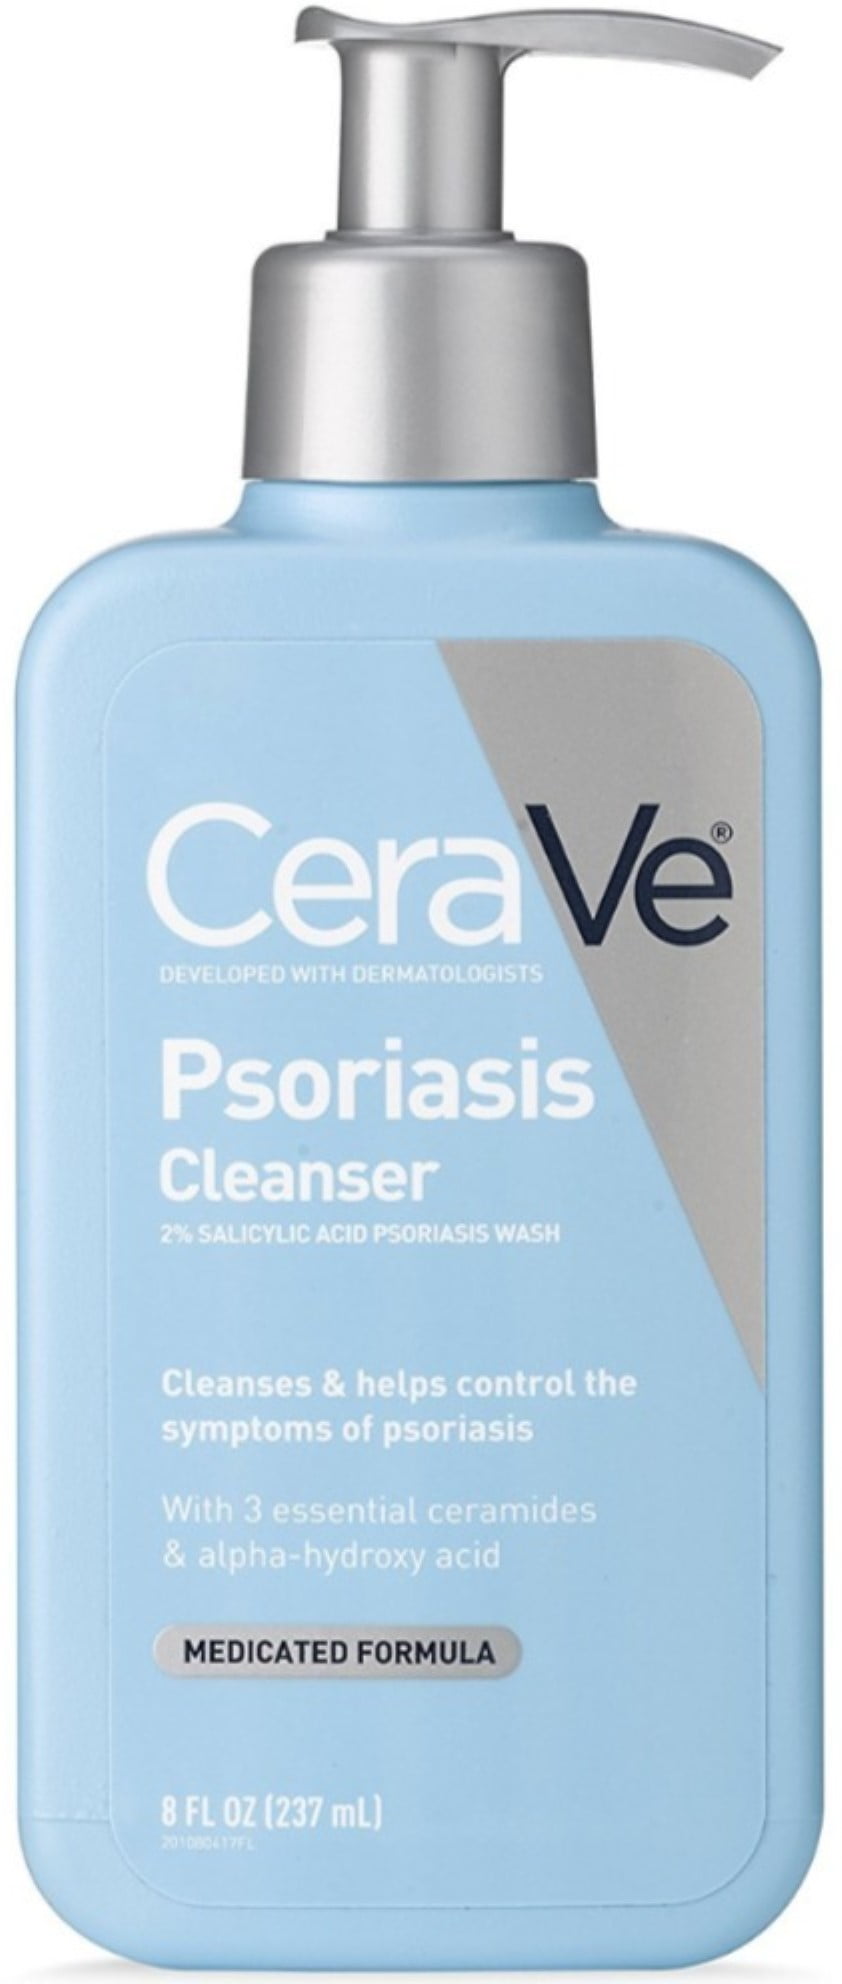 Cerave psoriasis cleanser with salicylic acid